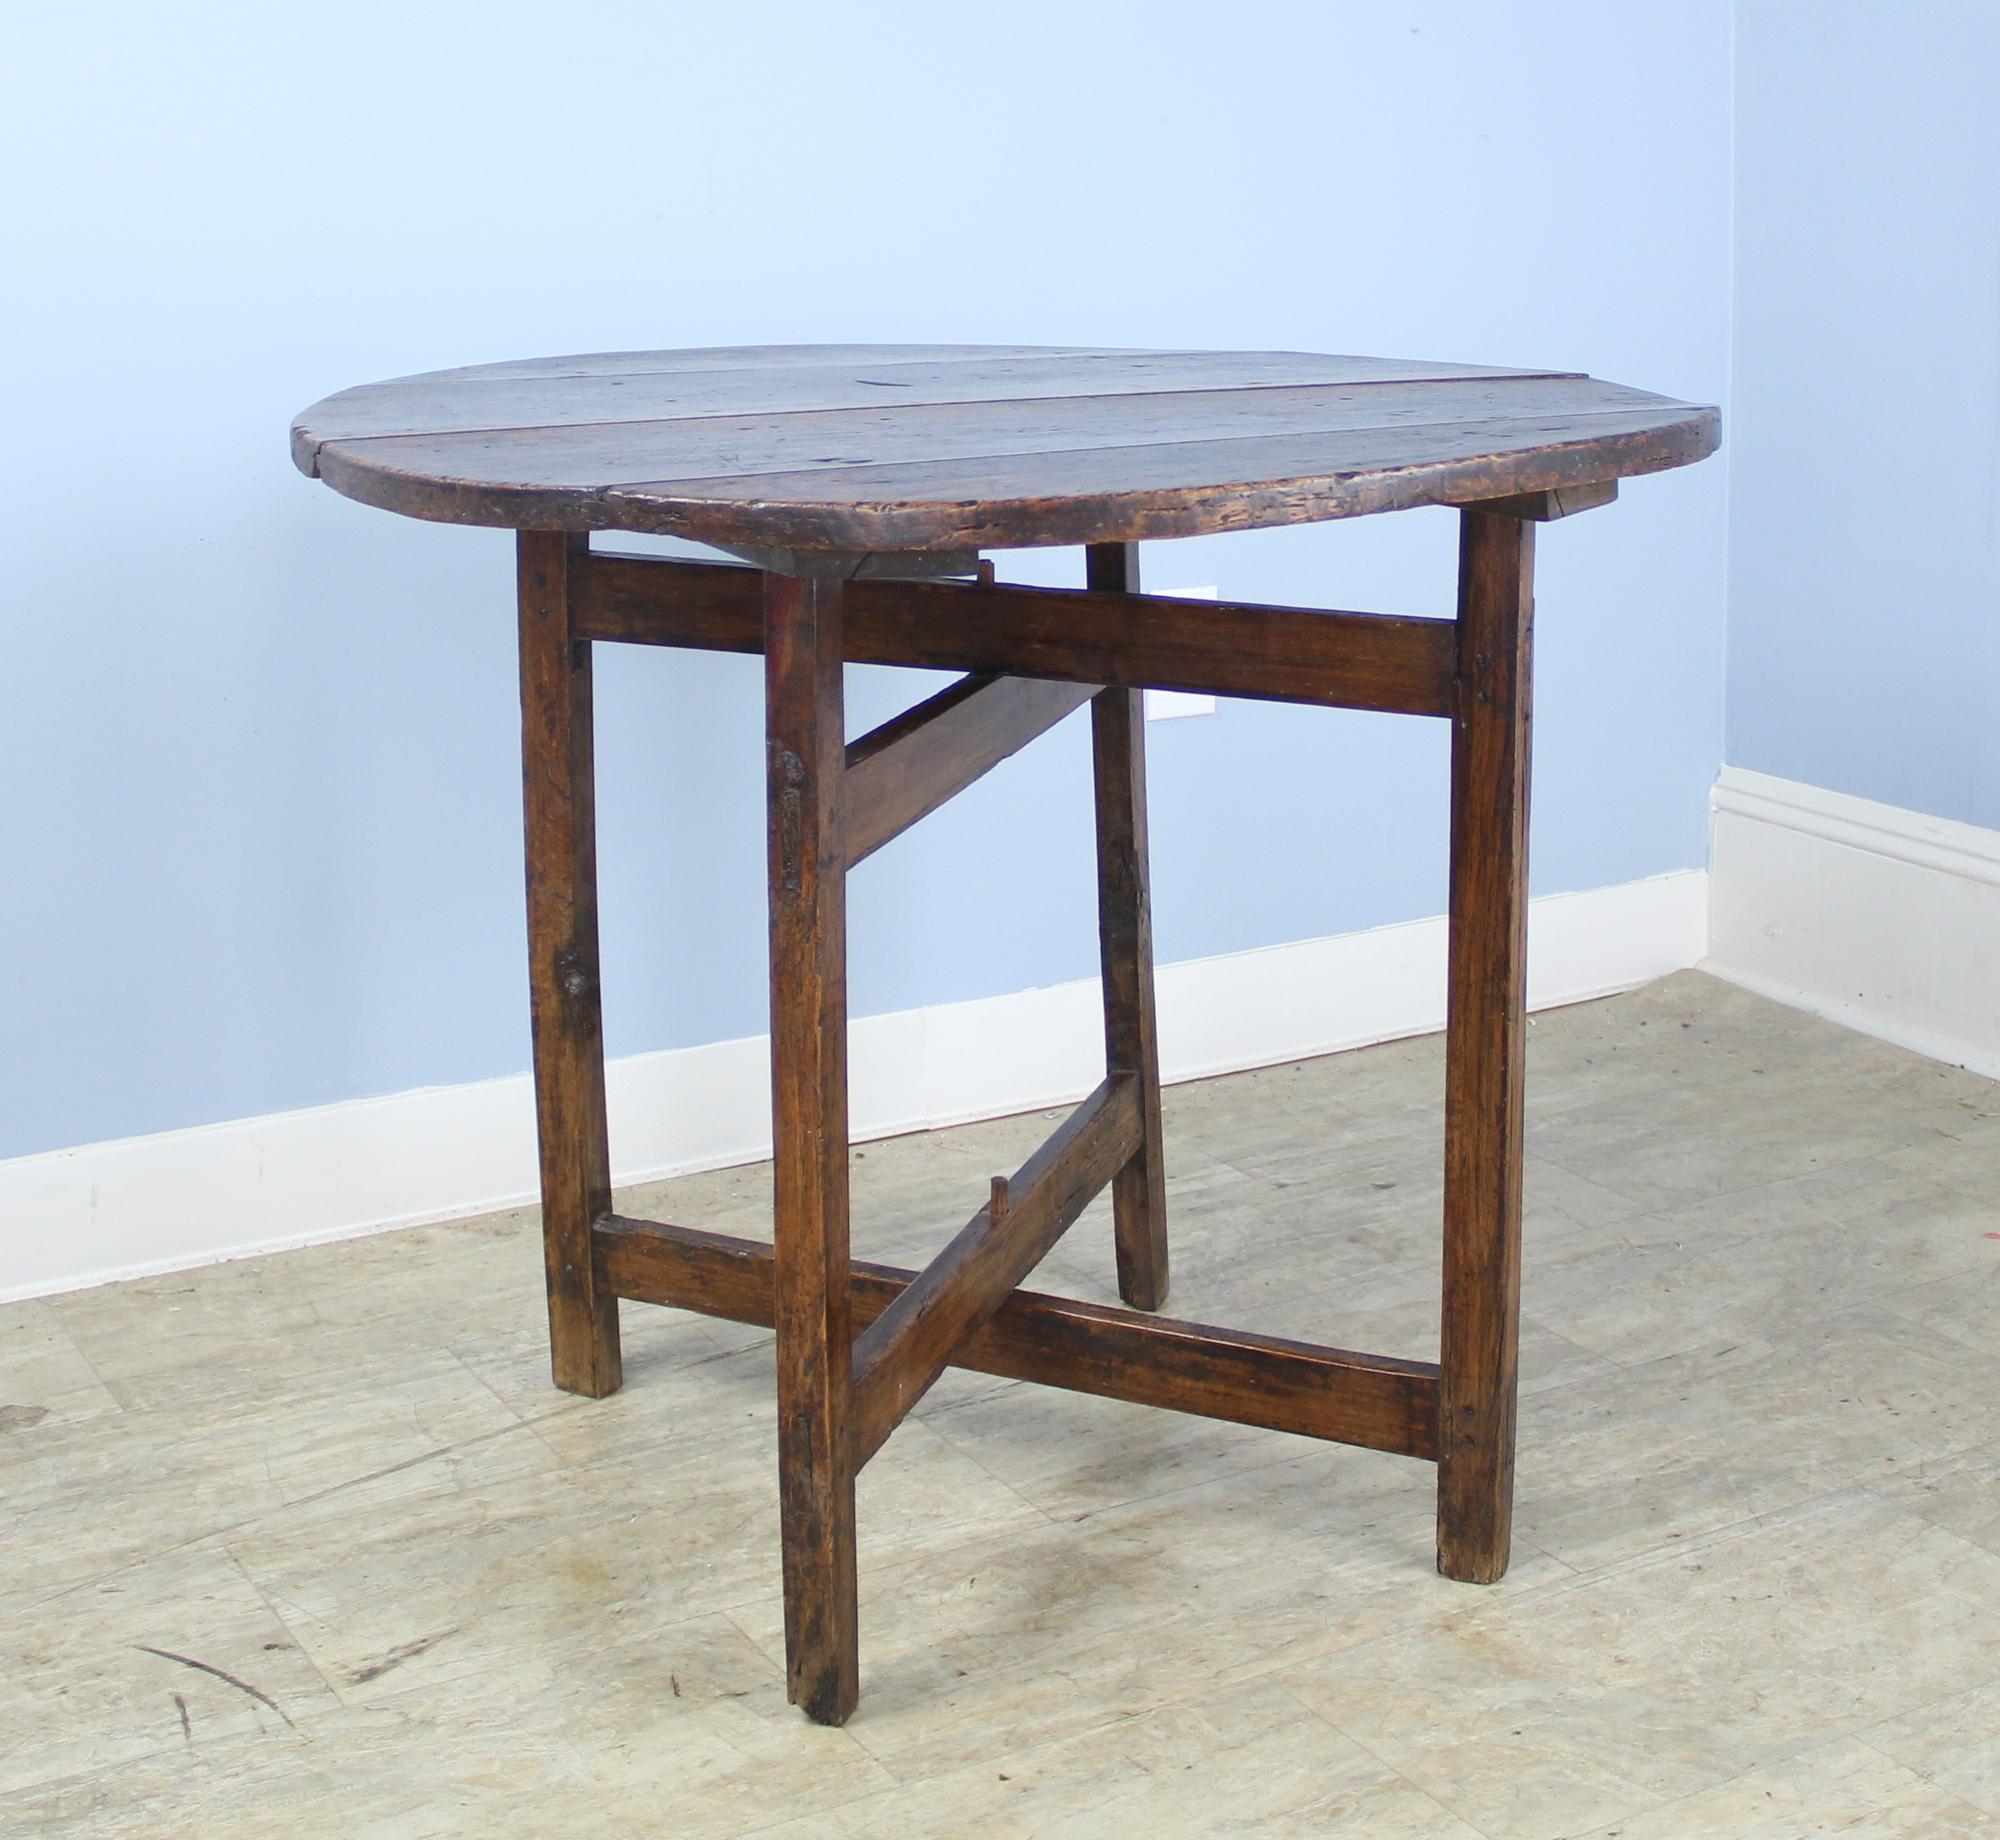 A mid-19th century French X-based side, lamp or occasional table in rich poplar. This was originally a small picnic or wine table that folded for easy transport. We have secured the top to the base permanently for stability. There is some waviness